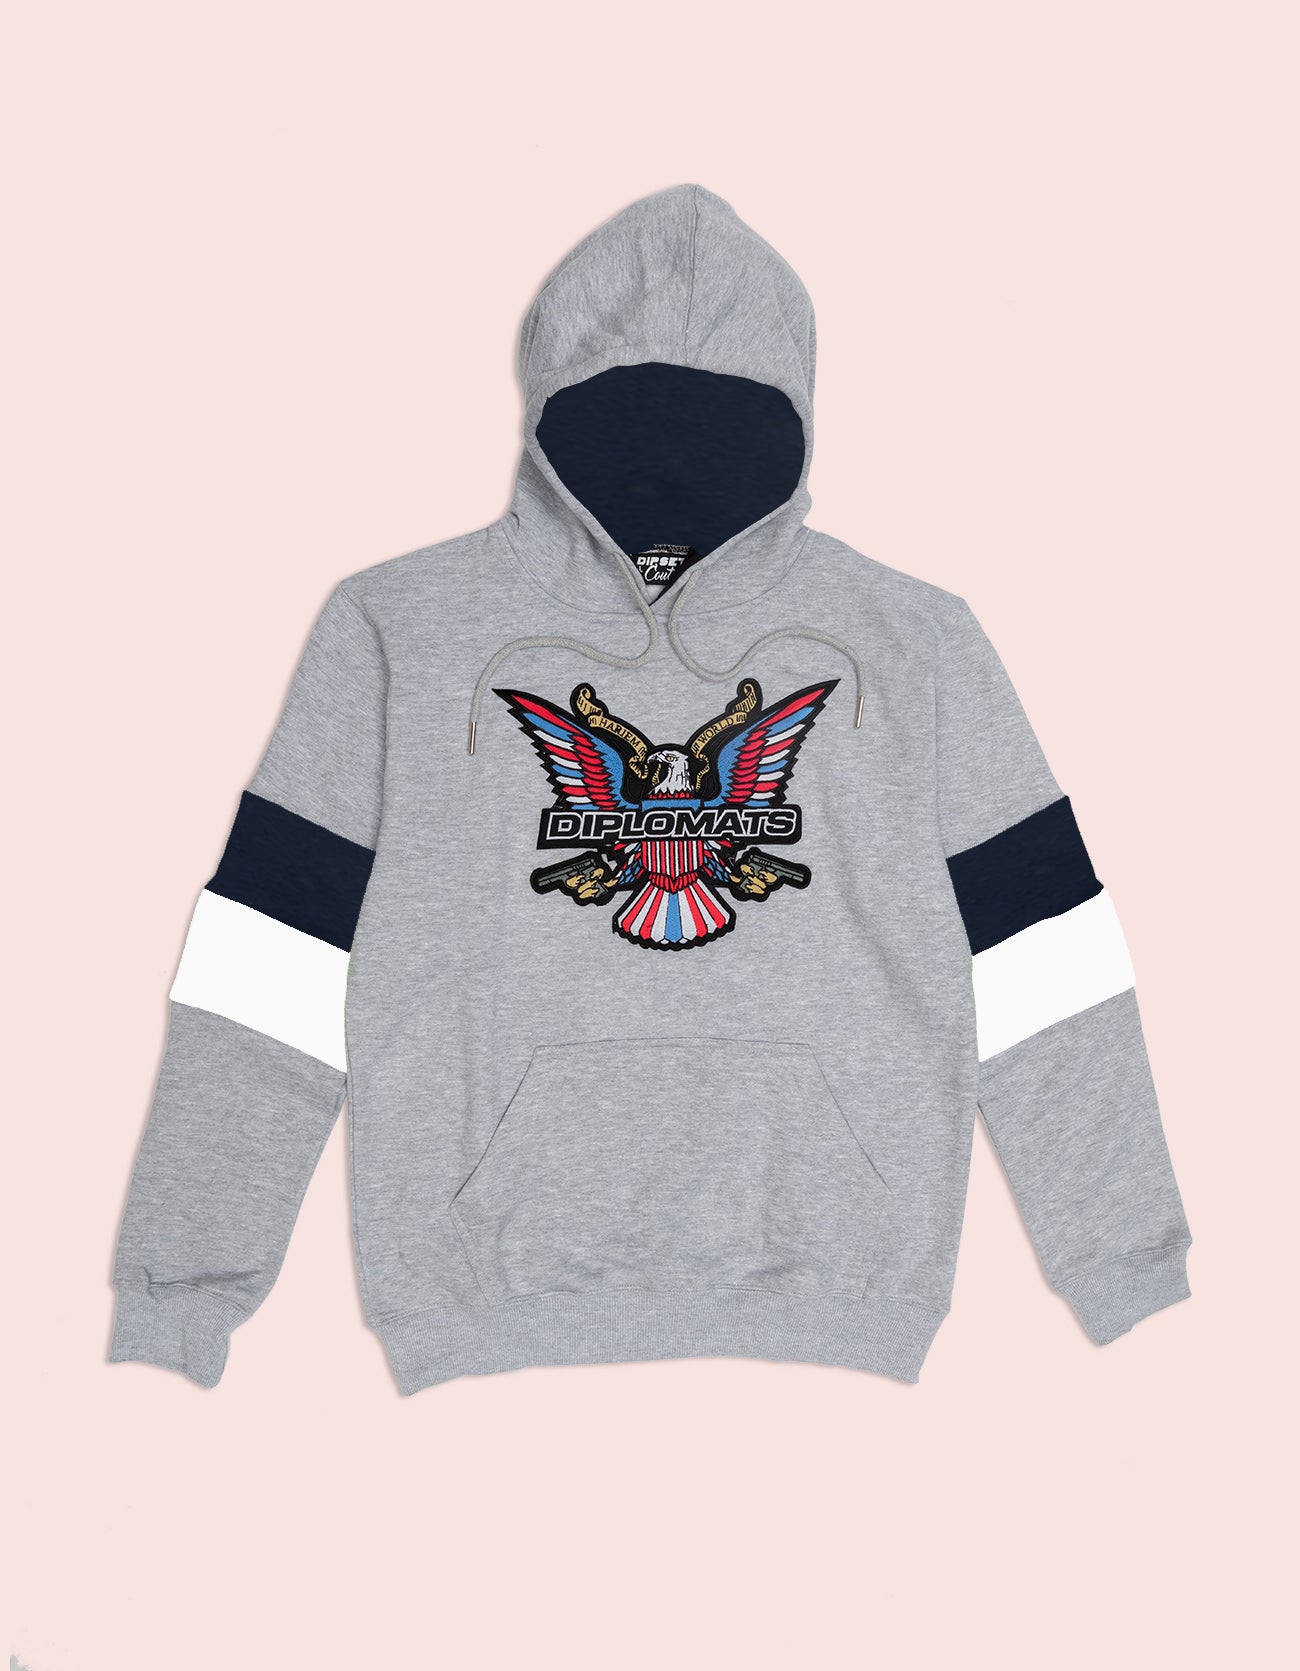 Dipset Couture Grey/Navy/White Sweatsuit